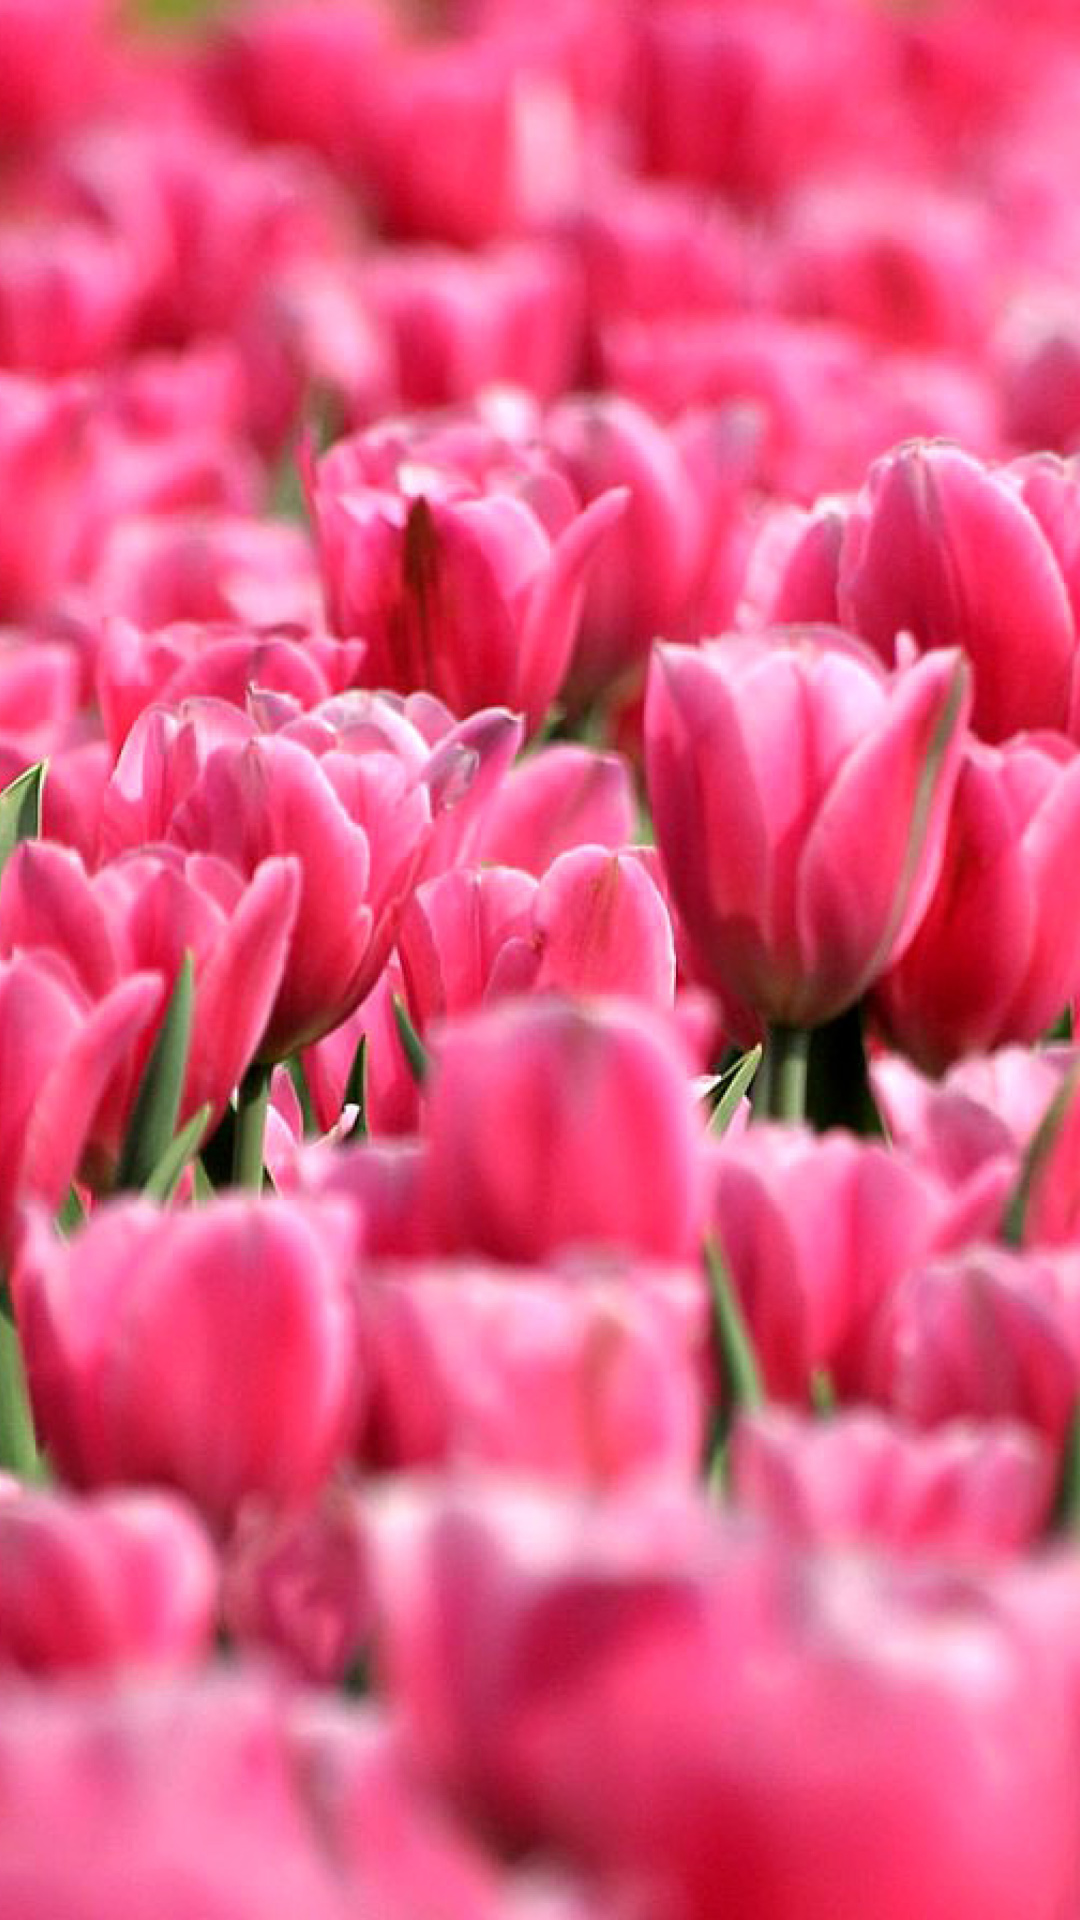 Pink Tulips in Holland Festival screenshot #1 1080x1920